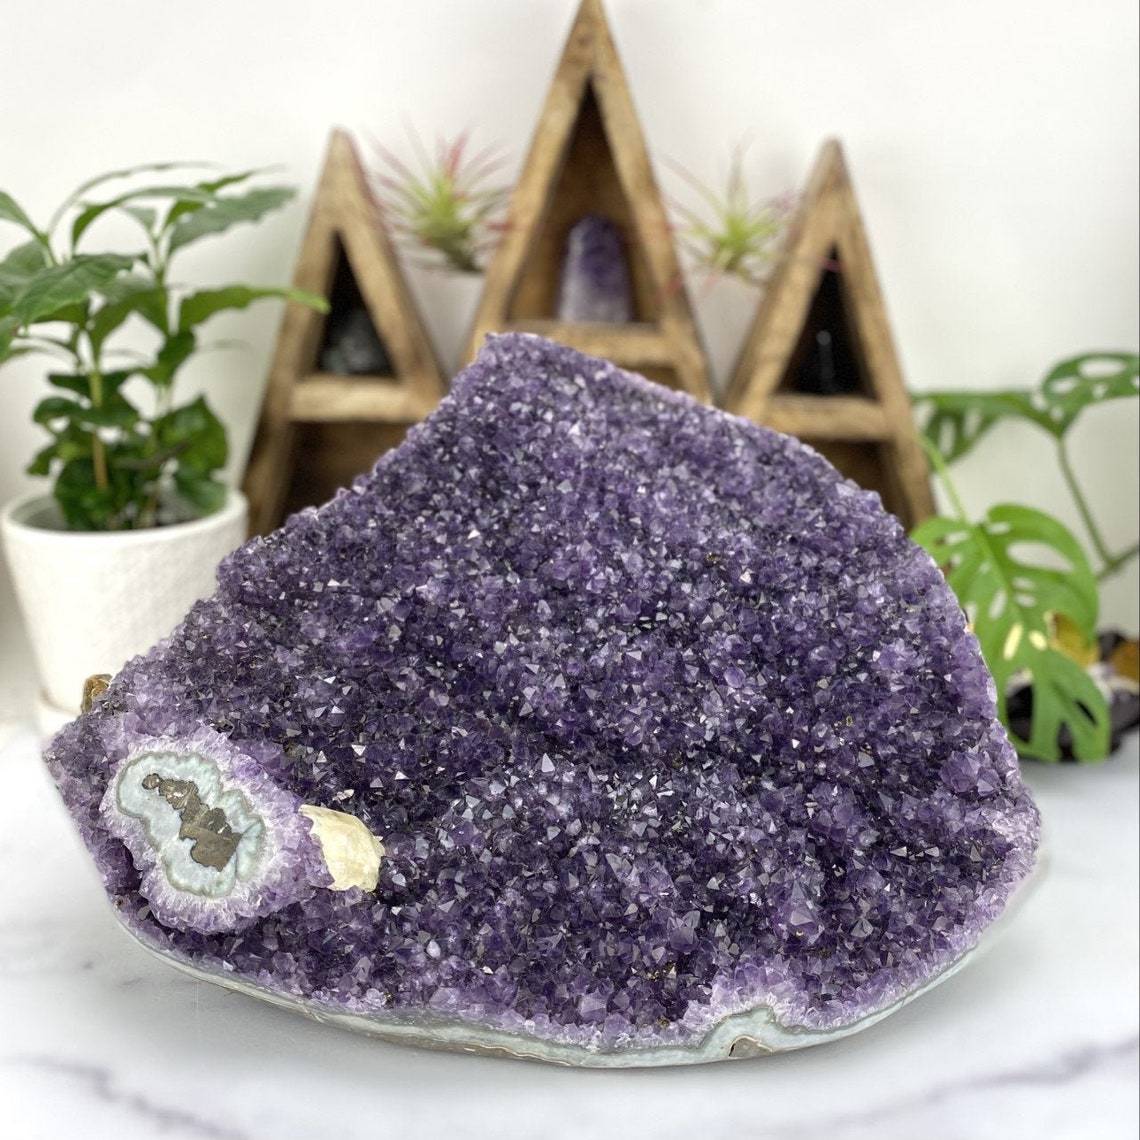 Amethyst Cluster with a Stalactite with Calcite with decorations in the background